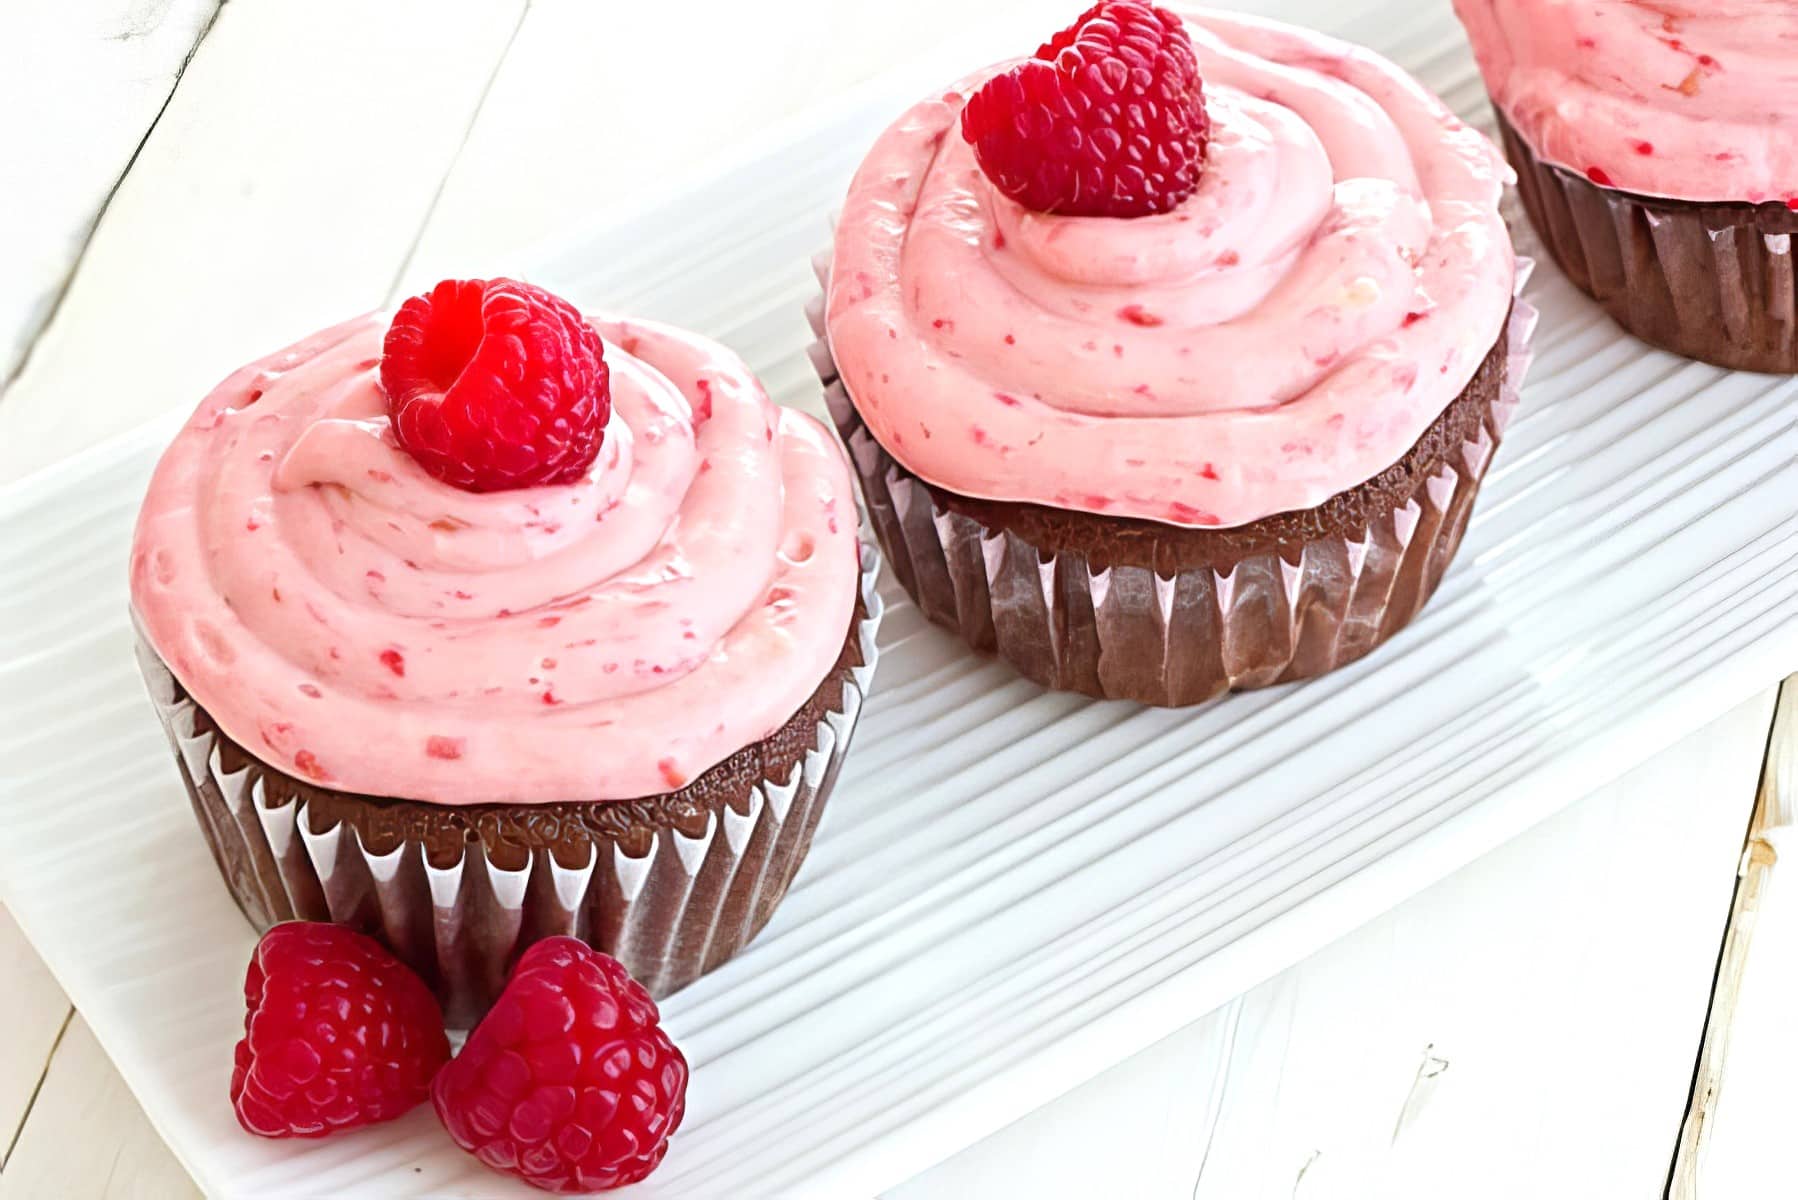 Chocolate Lambic Cupcakes with Raspberry Cream Cheese Frosting being served on a white plate